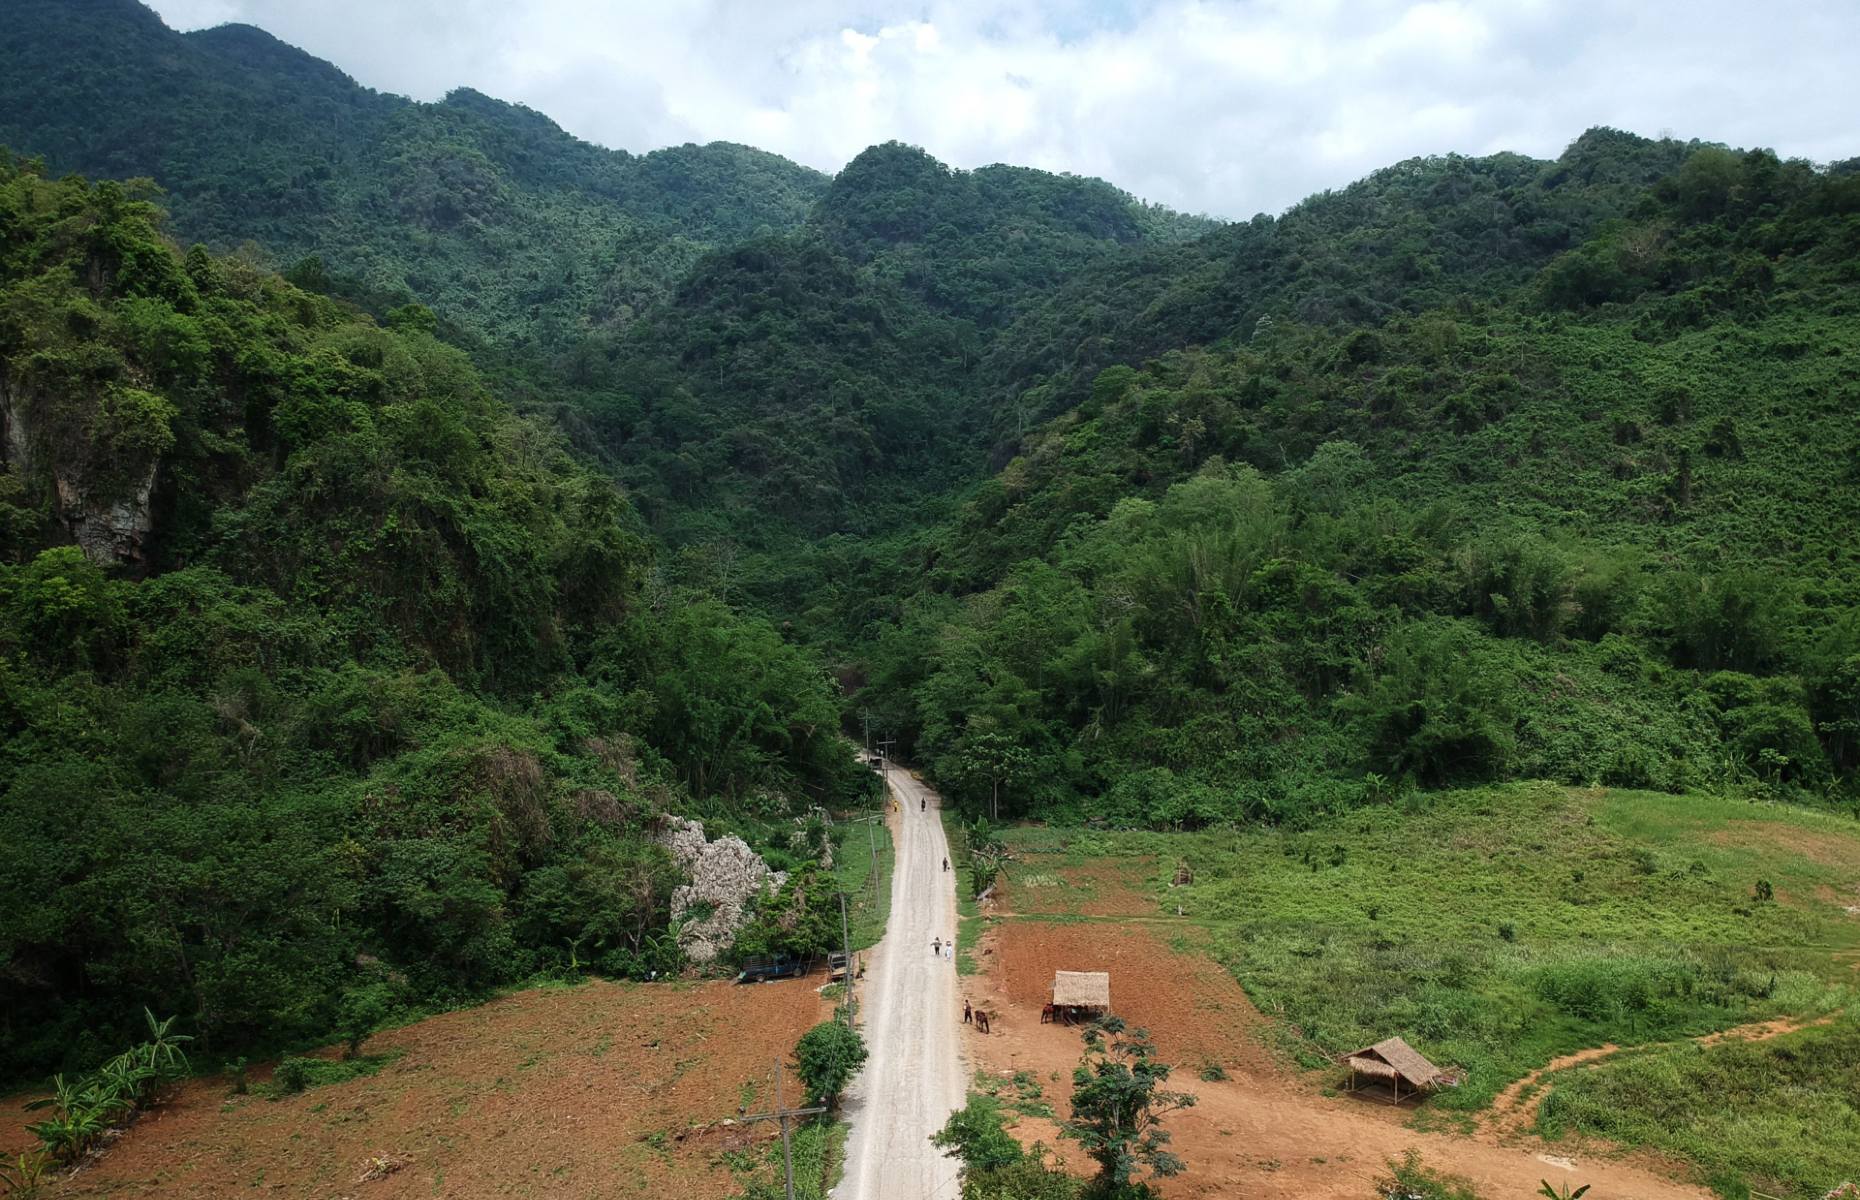 The road to the Tham Luang cave (Image: LILLIAN SUWANRUMPHA/AFP via Getty Images)